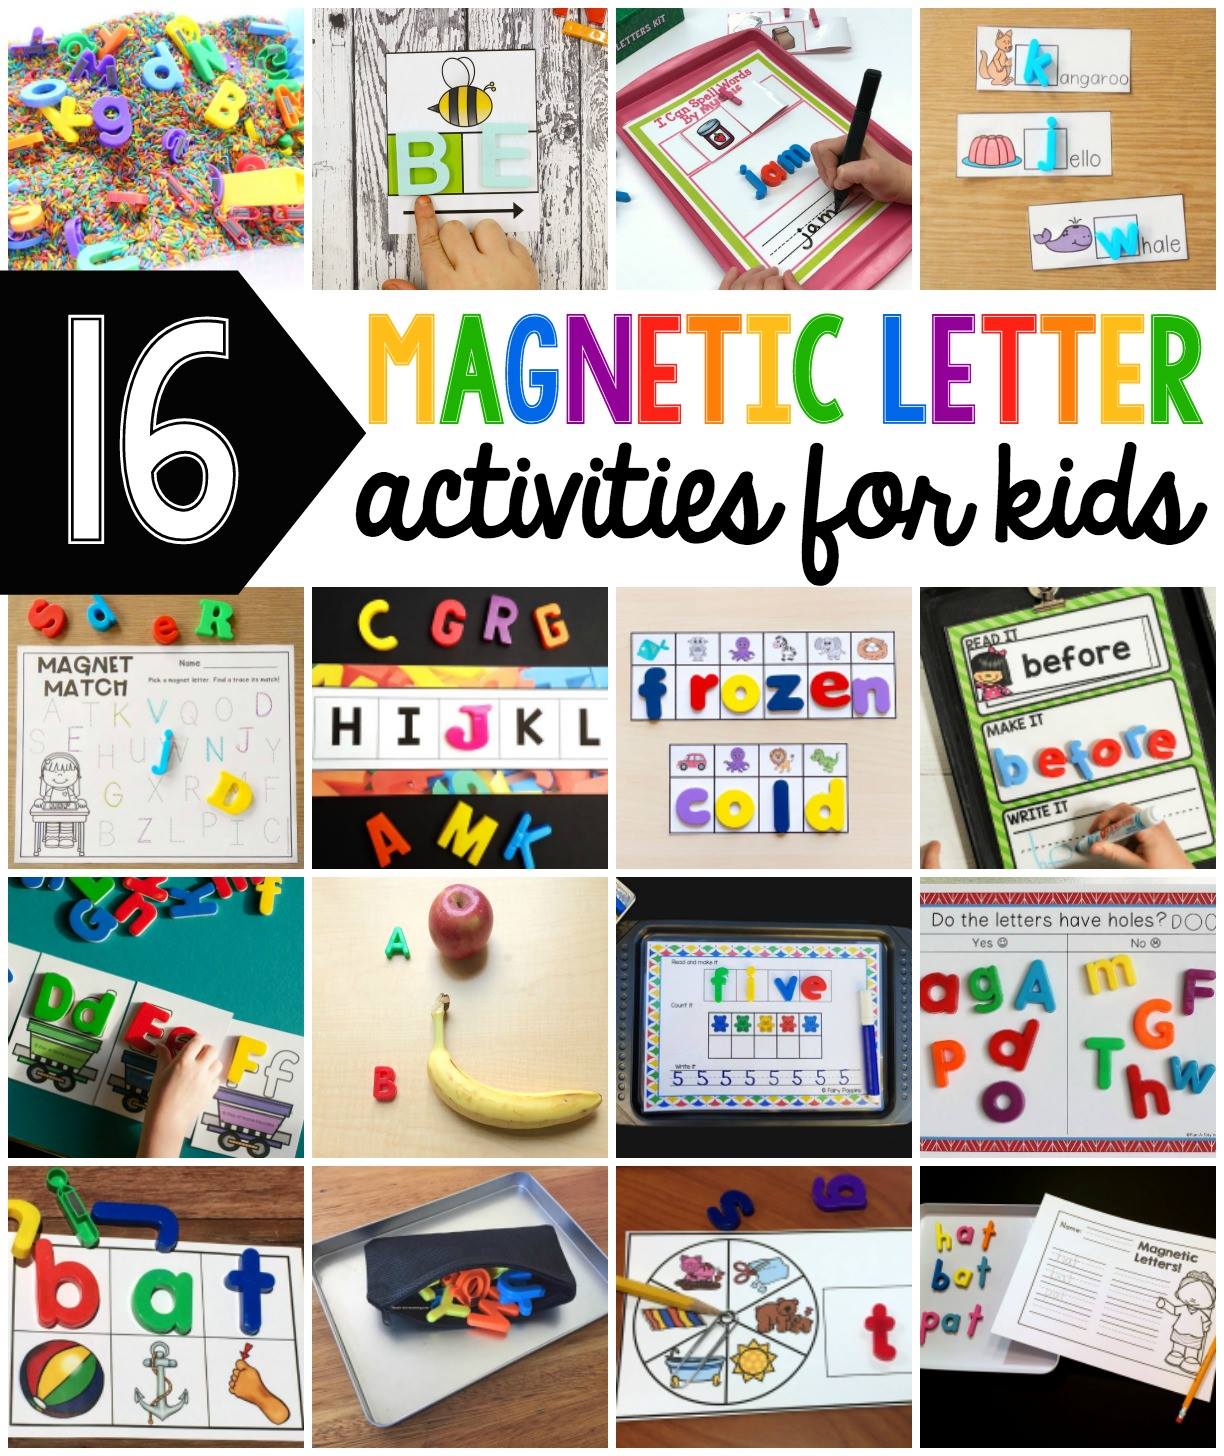 Fun alphabet magnets learning activities for kids!